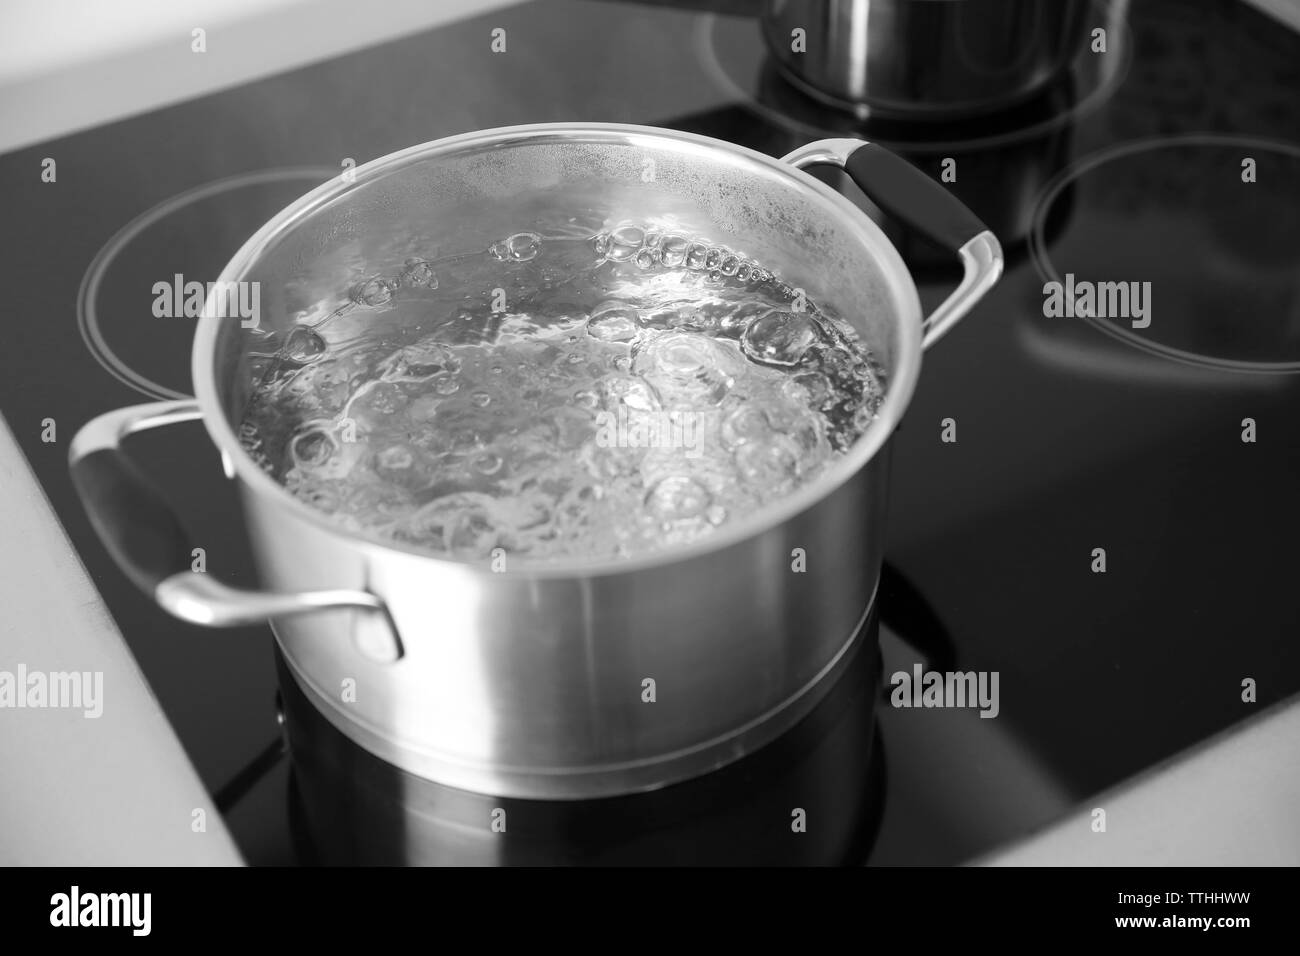 https://c8.alamy.com/comp/TTHHWW/boiling-spaghetti-in-pan-on-electric-stove-in-the-kitchen-TTHHWW.jpg